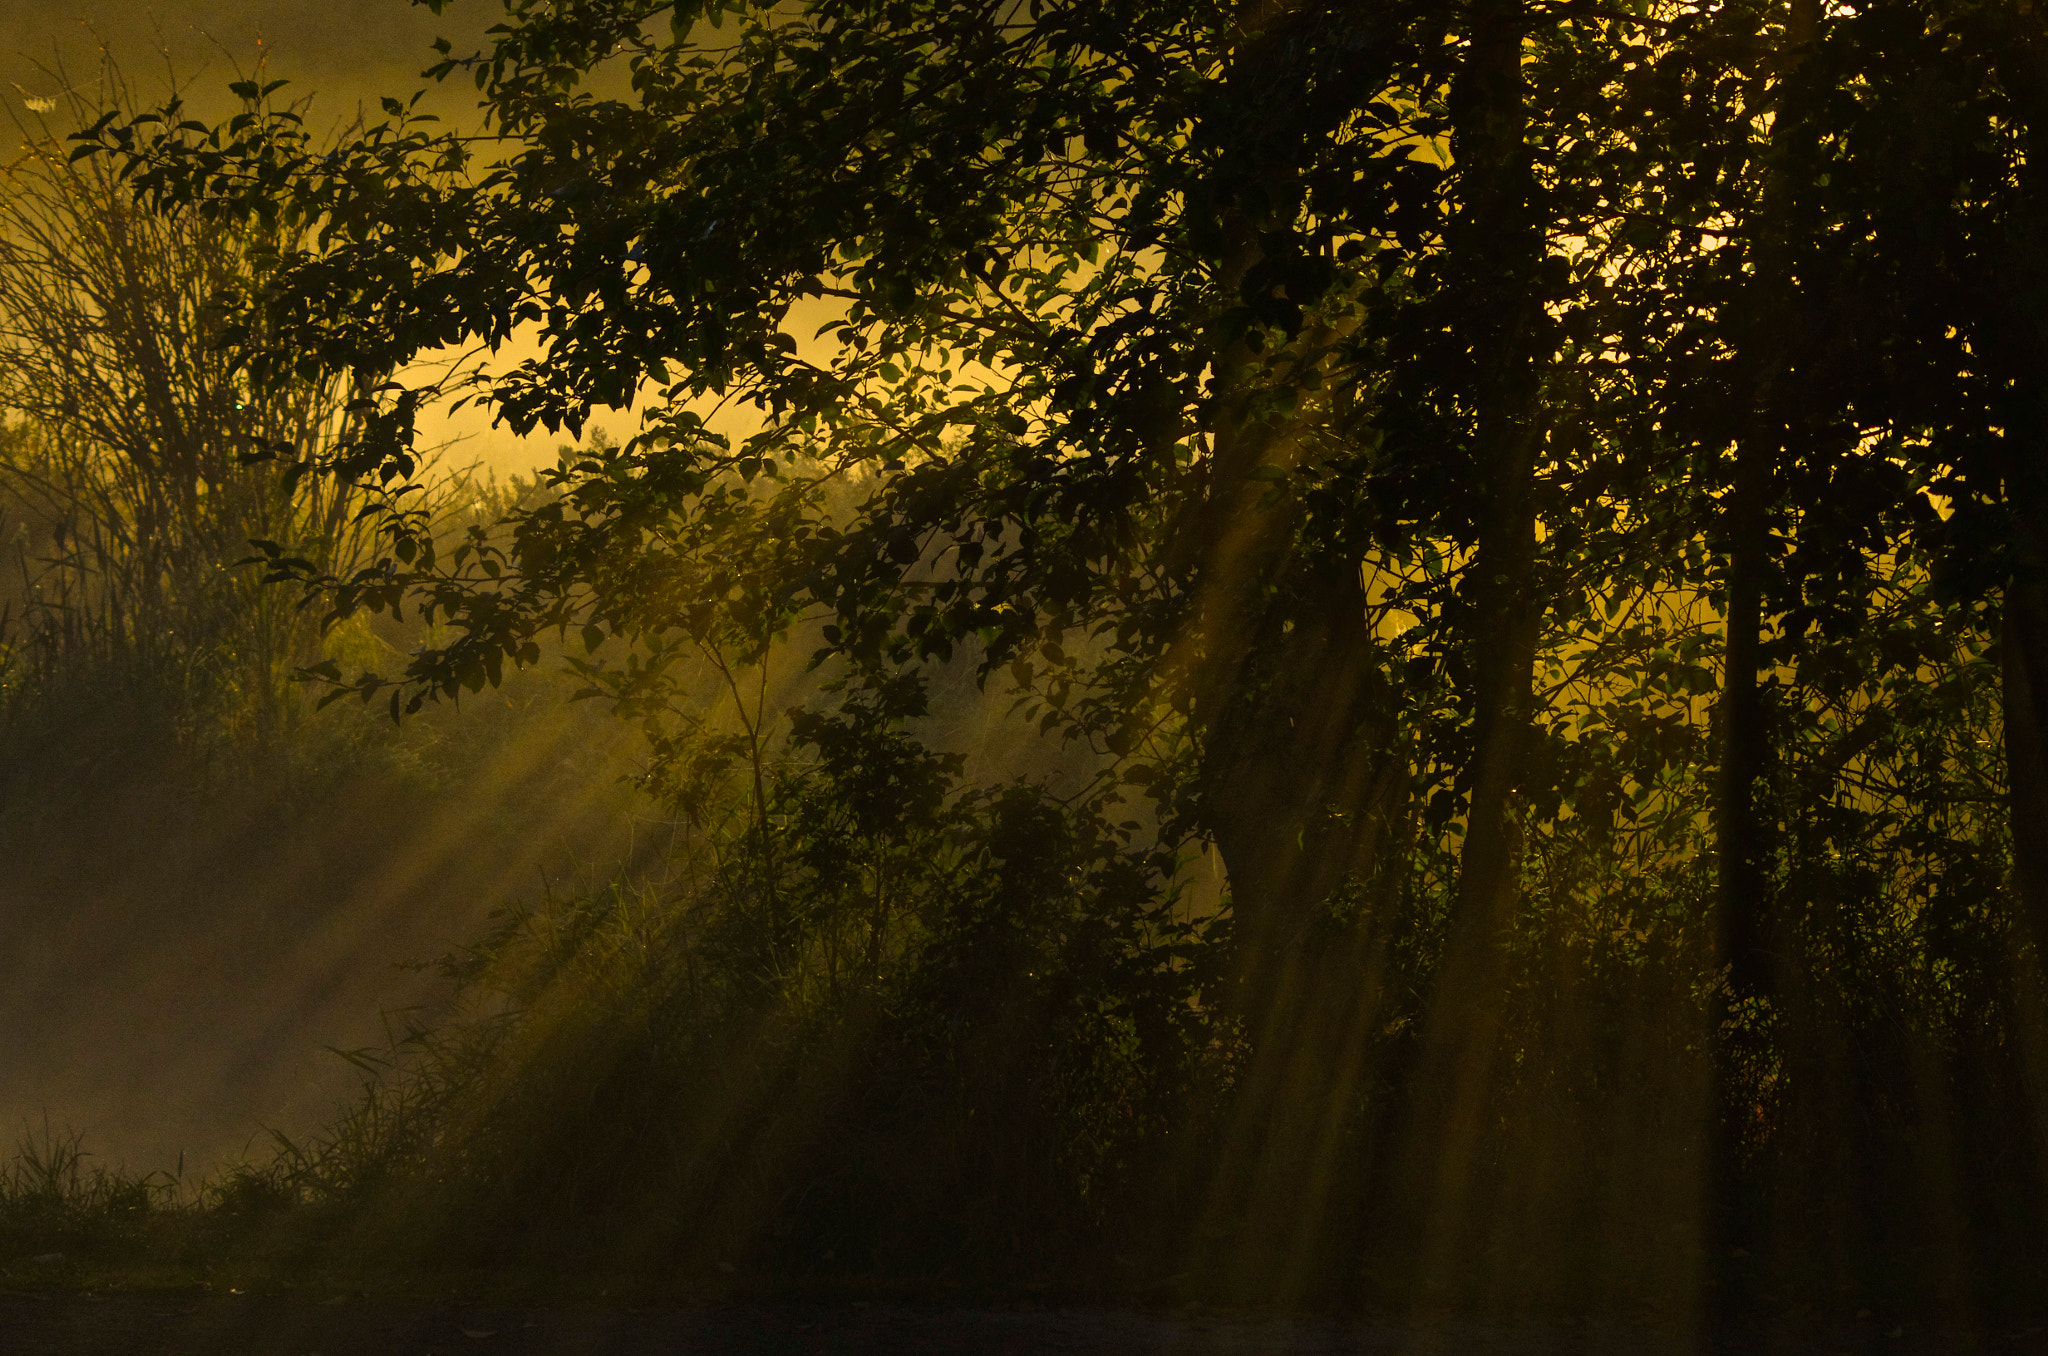 Pentax K-5 sample photo. Chasing sunbeams in the mist photography